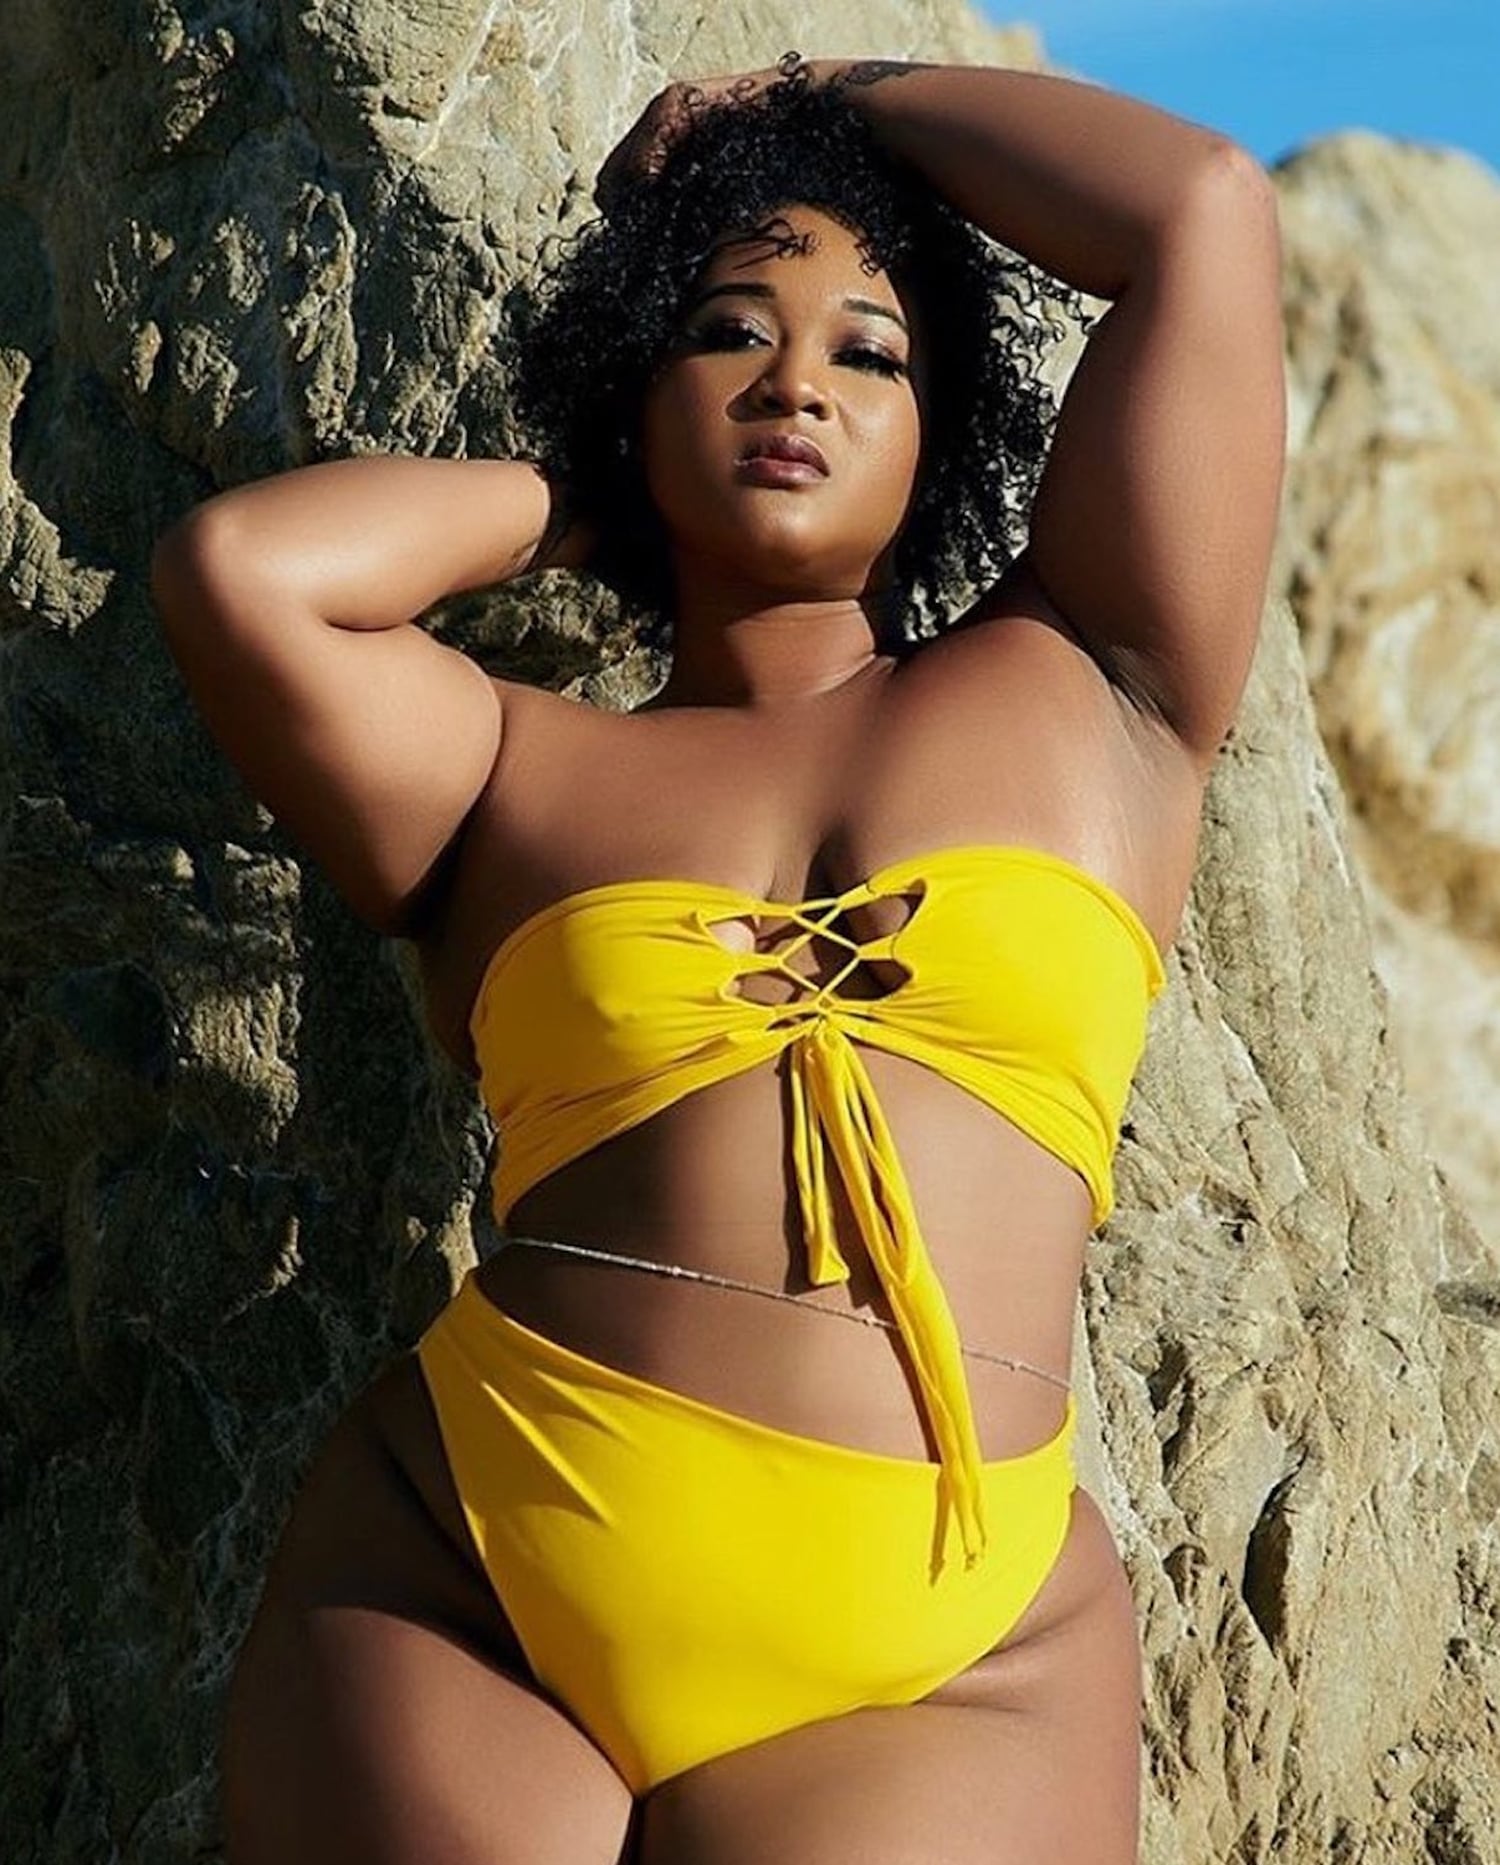 Black-Owned Swimsuit Brands to Shop in 2022